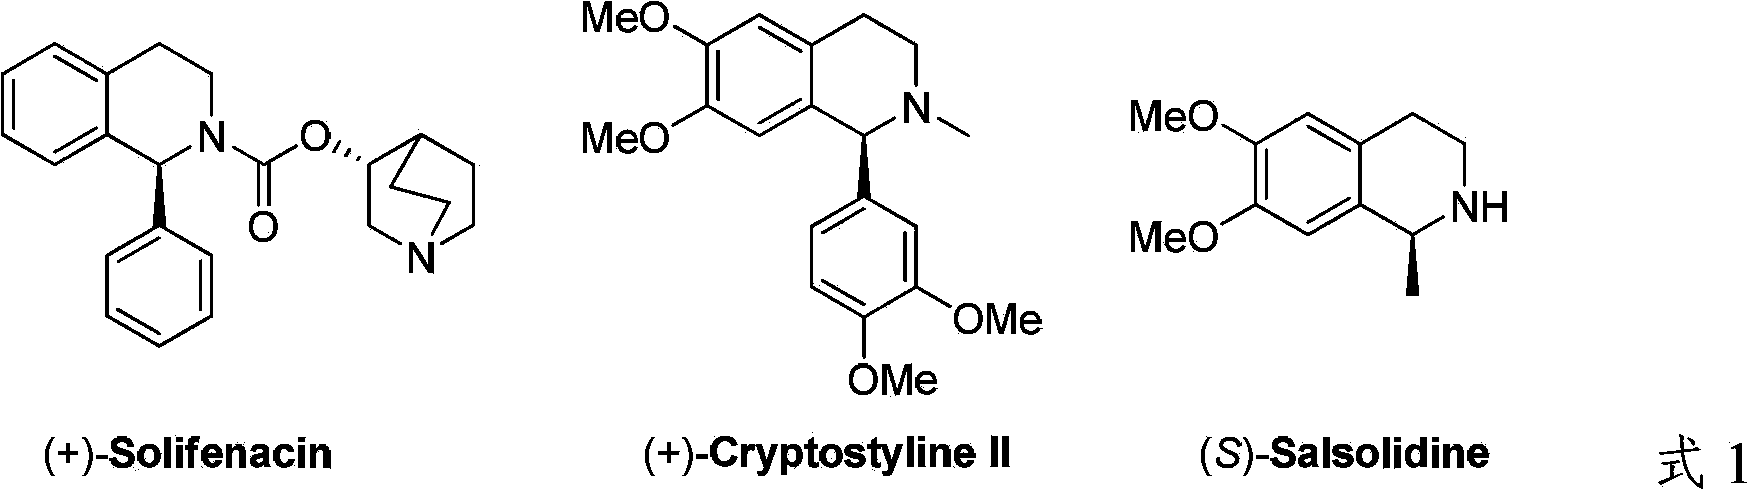 Method for synthesizing chiraltetrahydro naphthalenederivate through asymmetric hydrogenation on isoquinoline by means of iridium catalyst